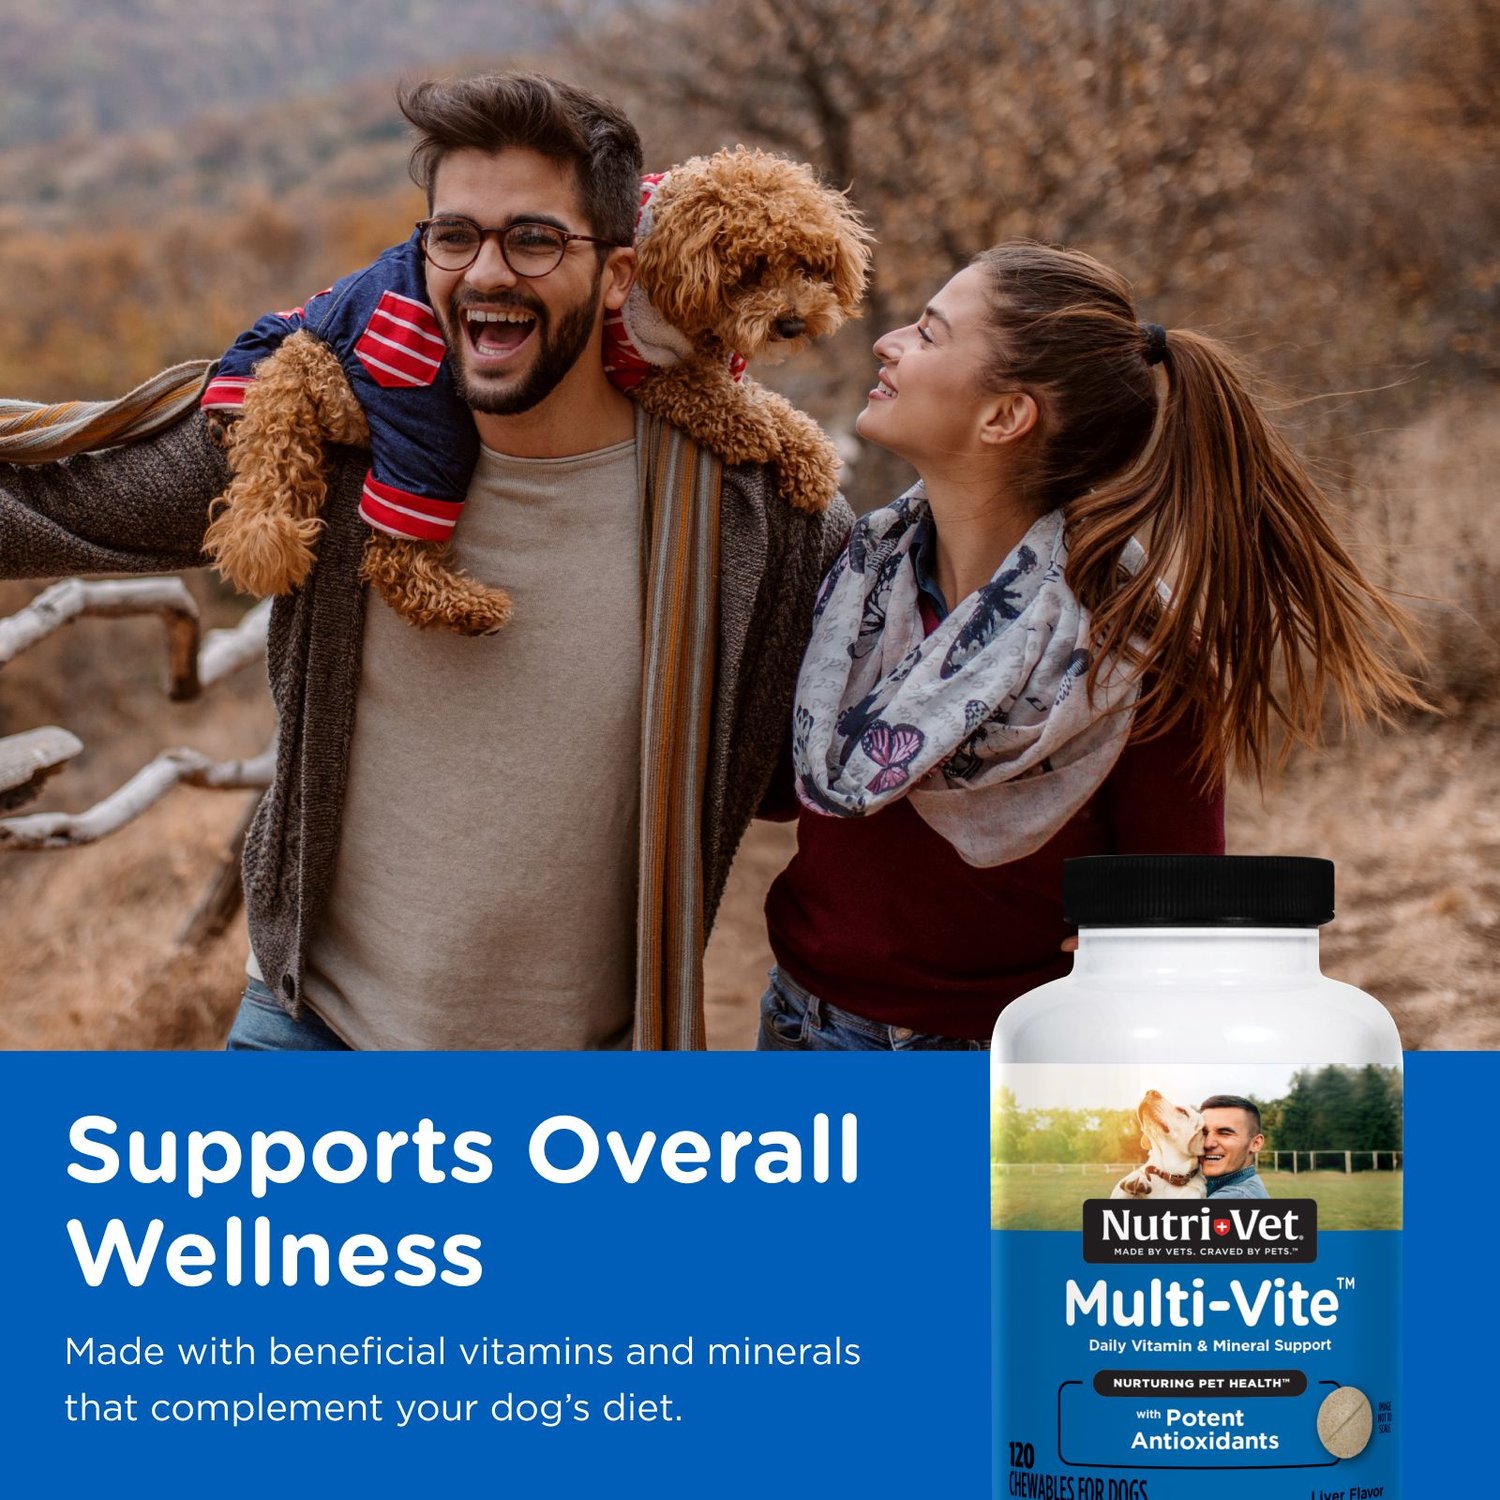 Nutri-Vet Multi-Vite Chewable Dog Supplement, 120 count - Chewy.com